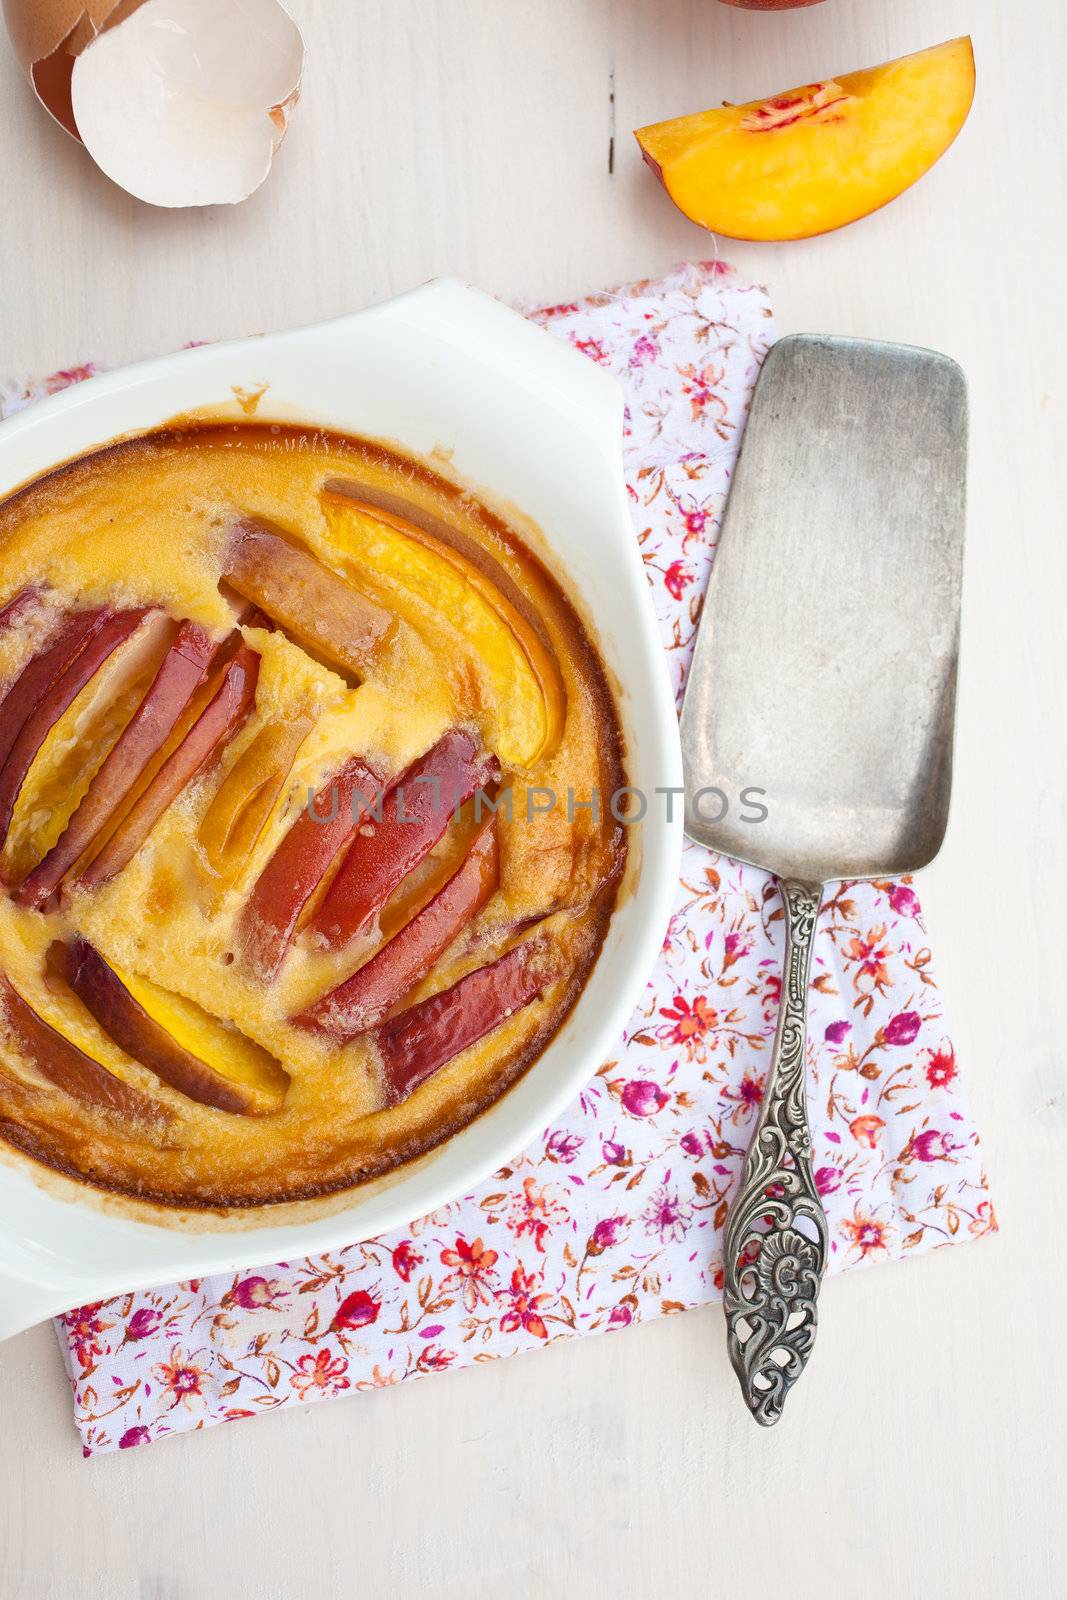 Delicious and baked dessert with egg and nectarines